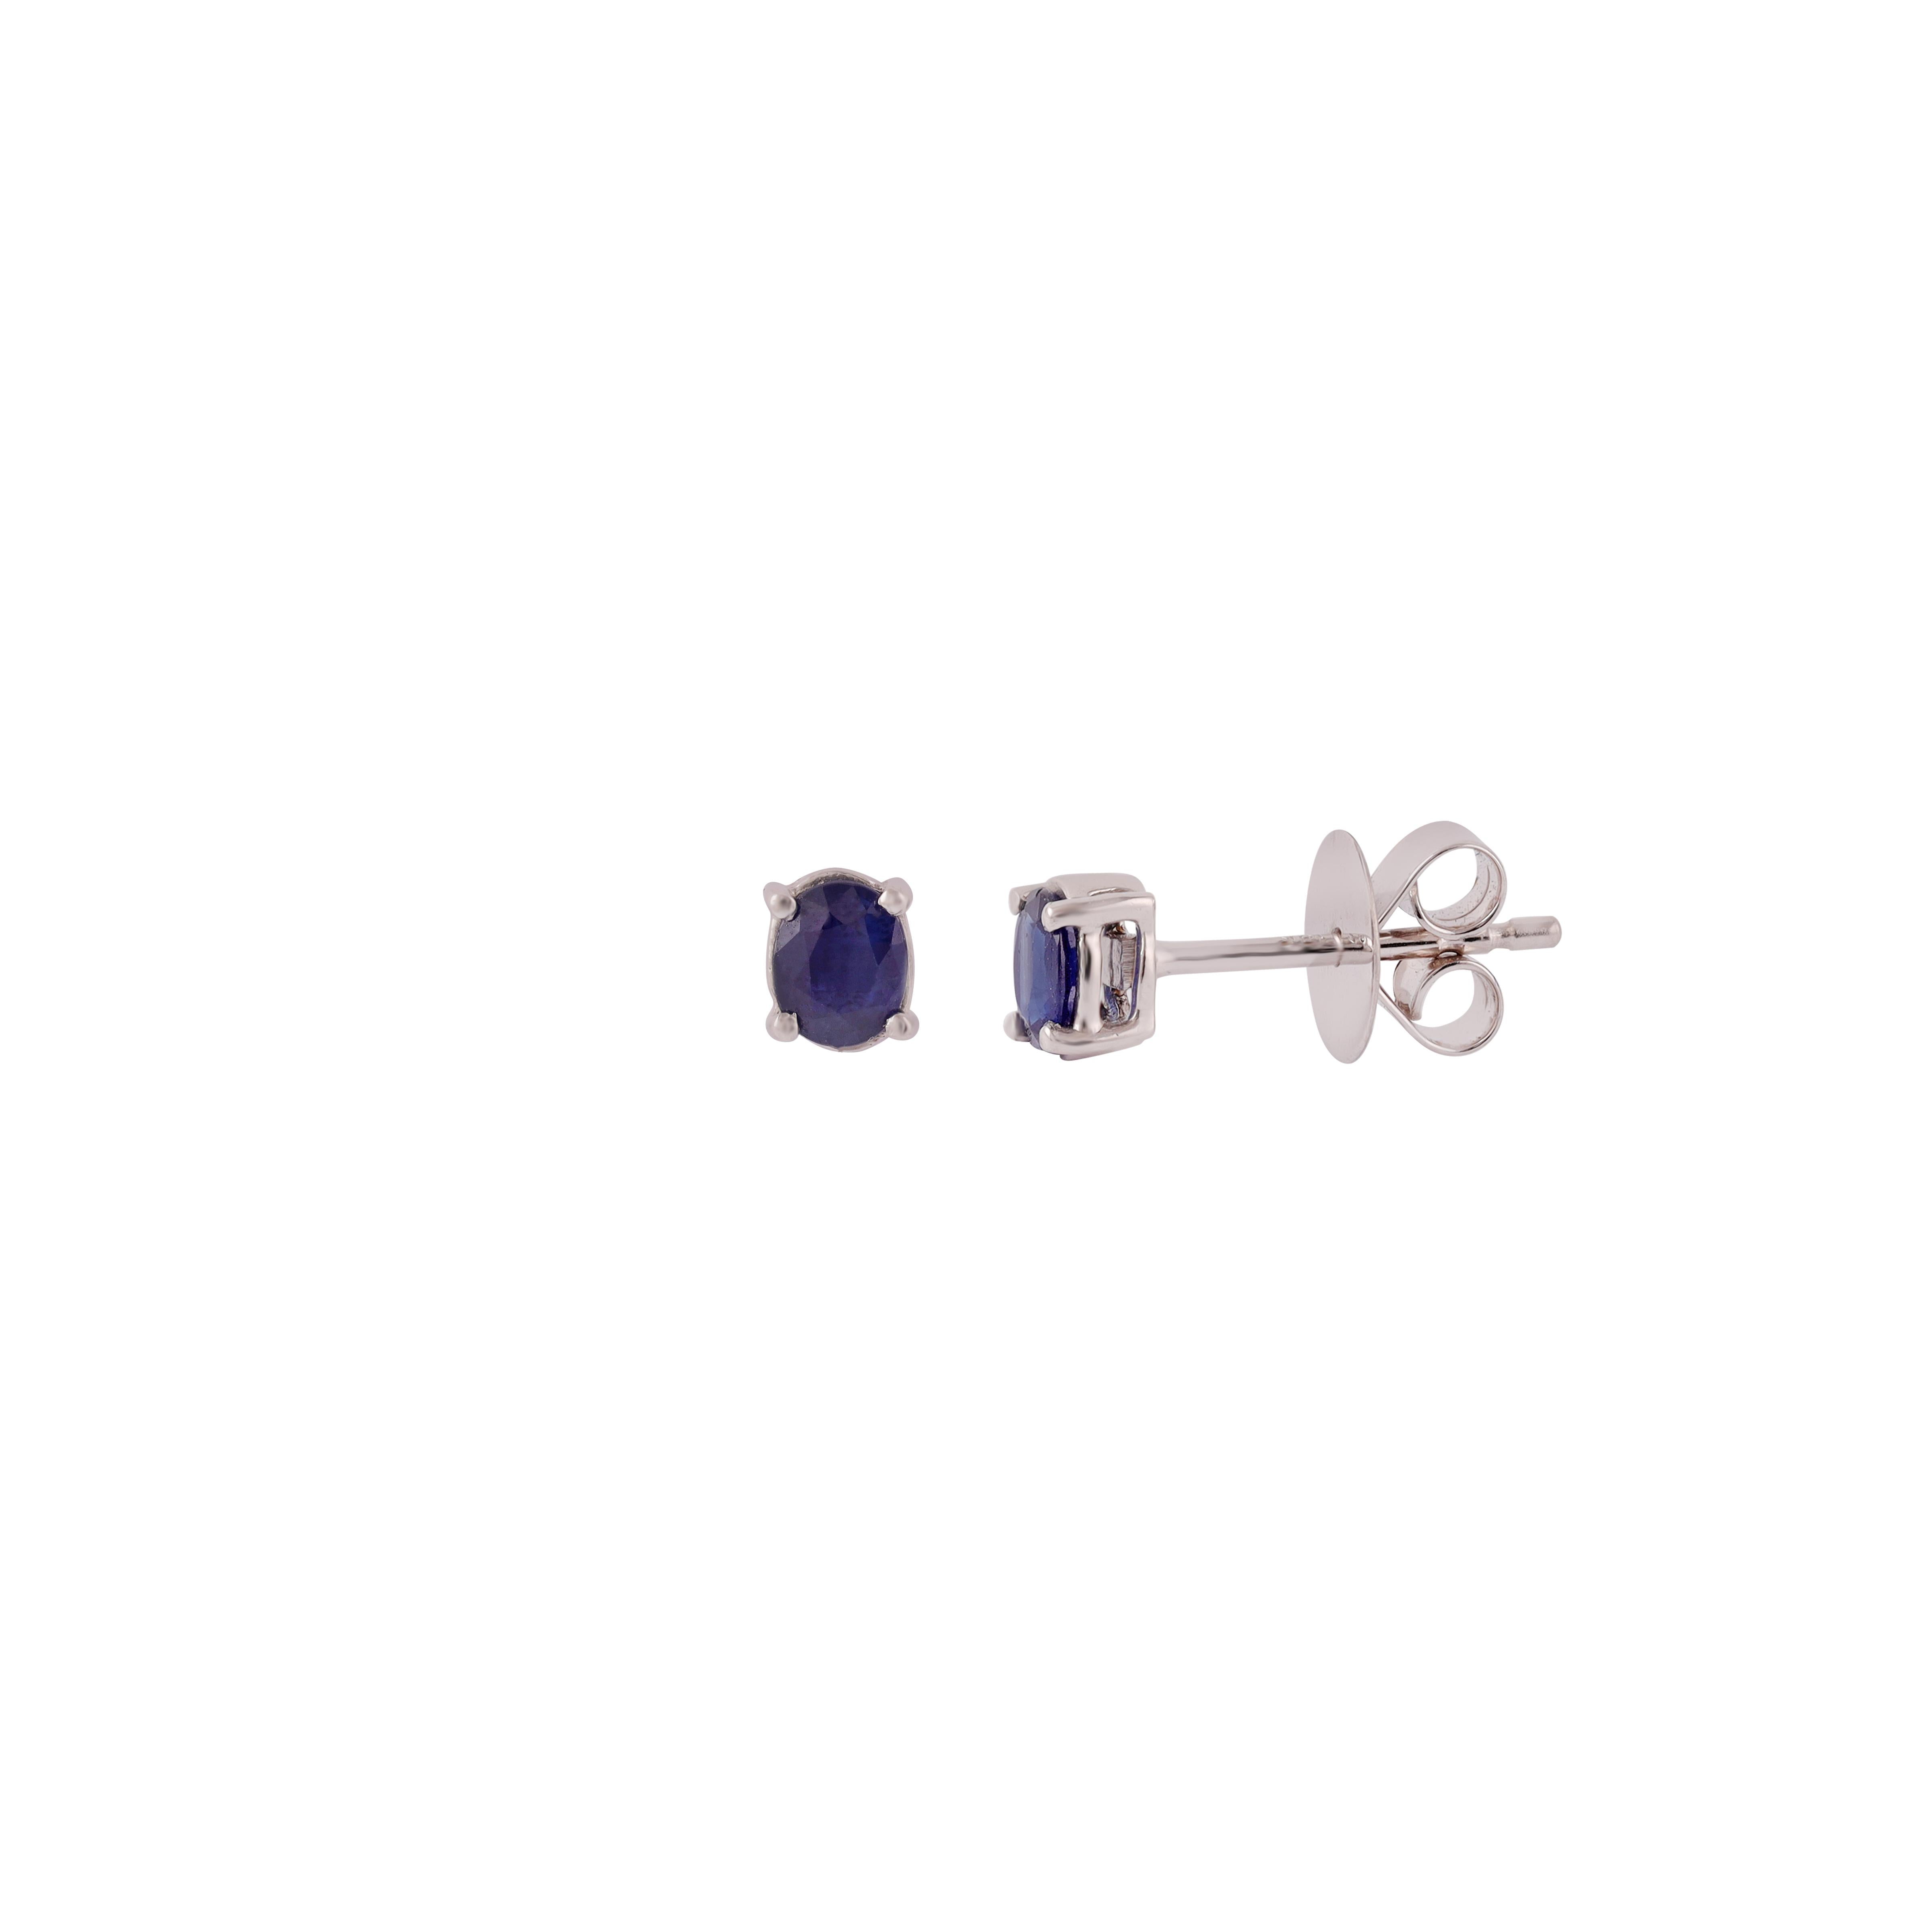 0.64 Carat Sapphire Stud Earrings in 18k White Gold In New Condition For Sale In Jaipur, Rajasthan